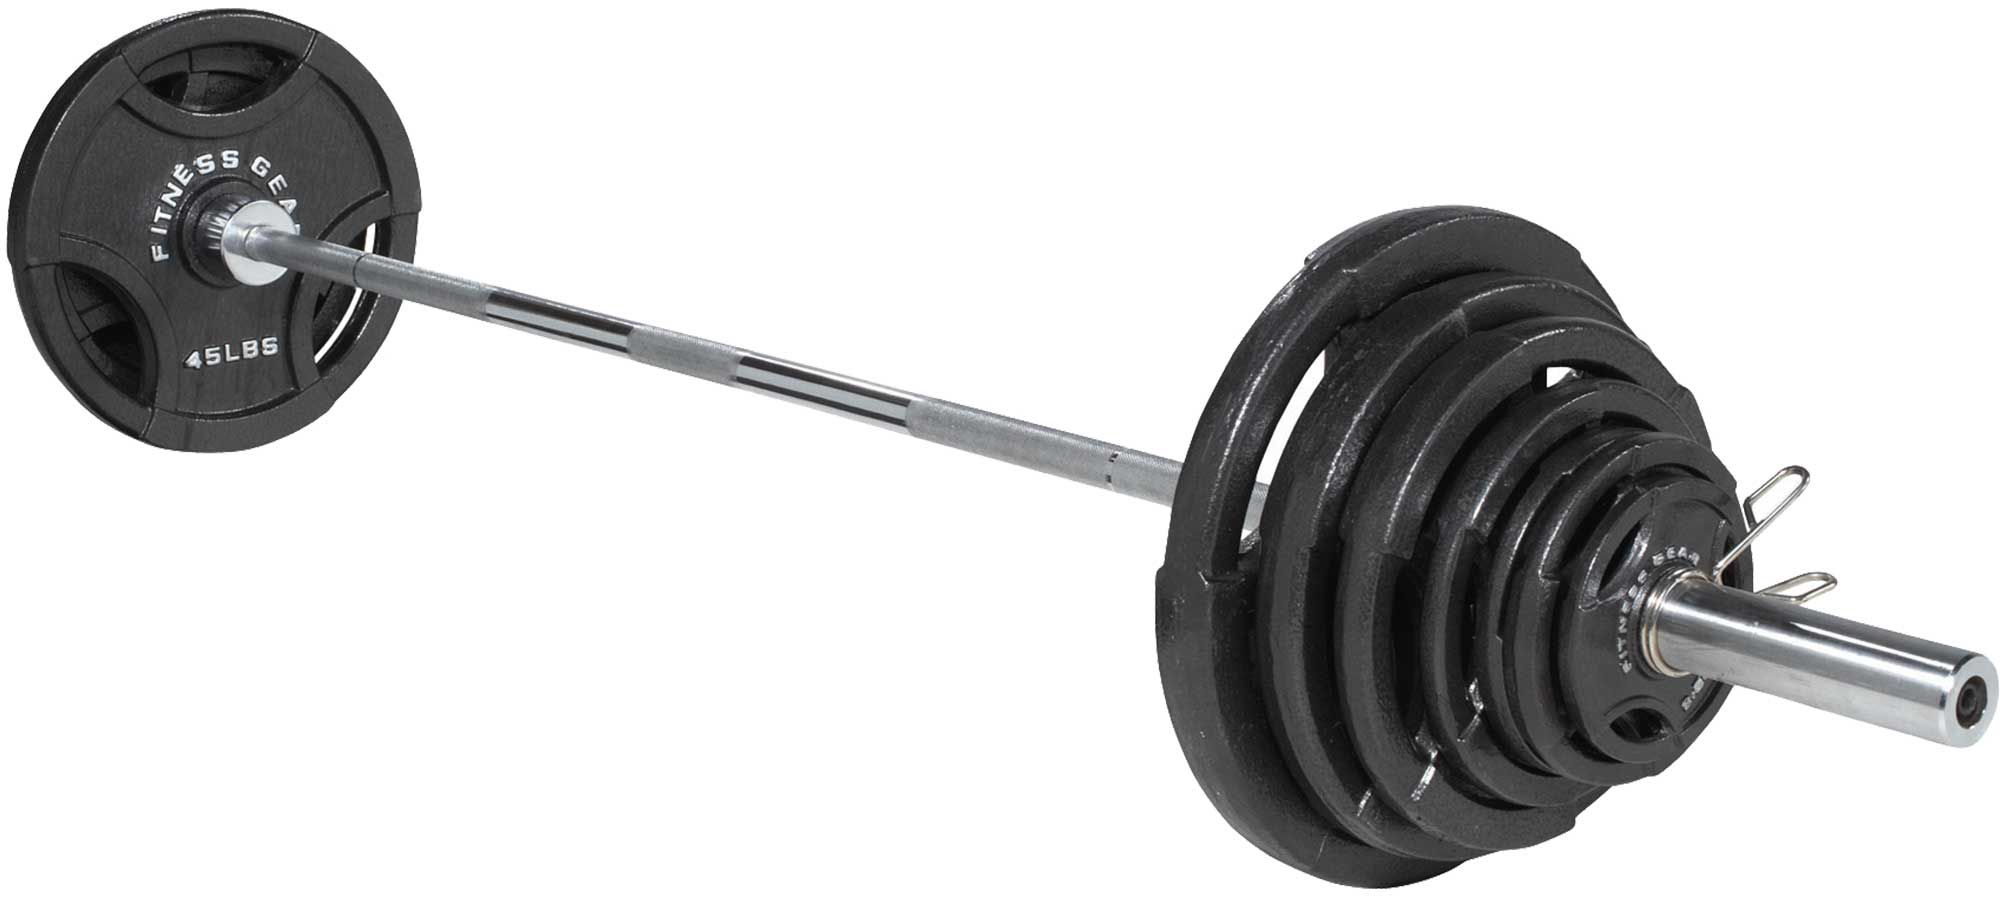 weight of olympic weightlifting bar